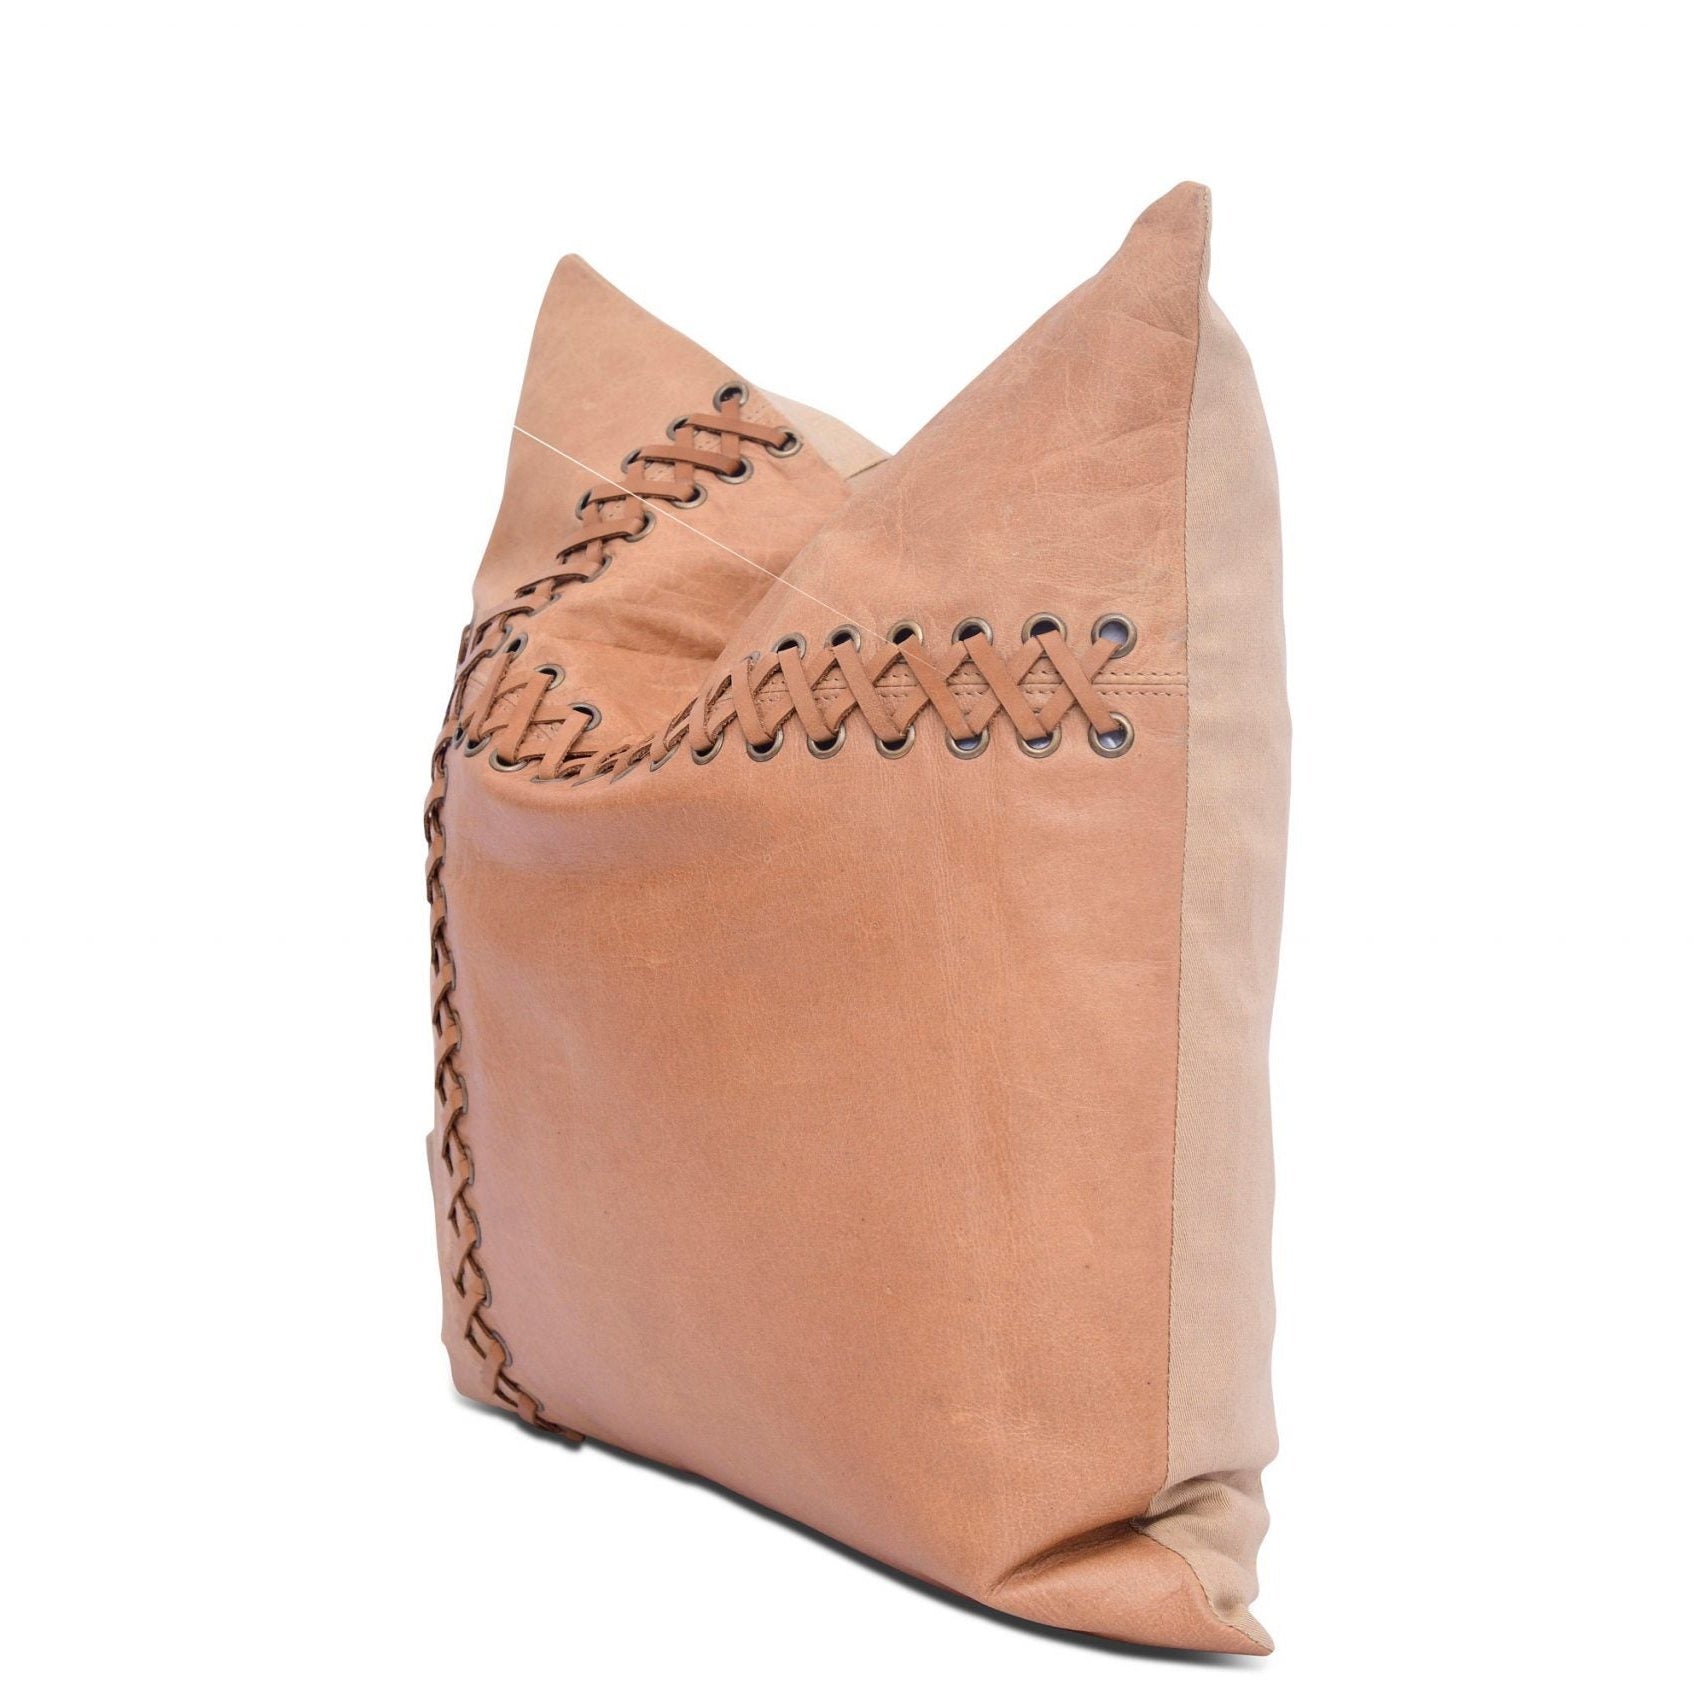 100% Tan Leather Cushion Cover - Beige